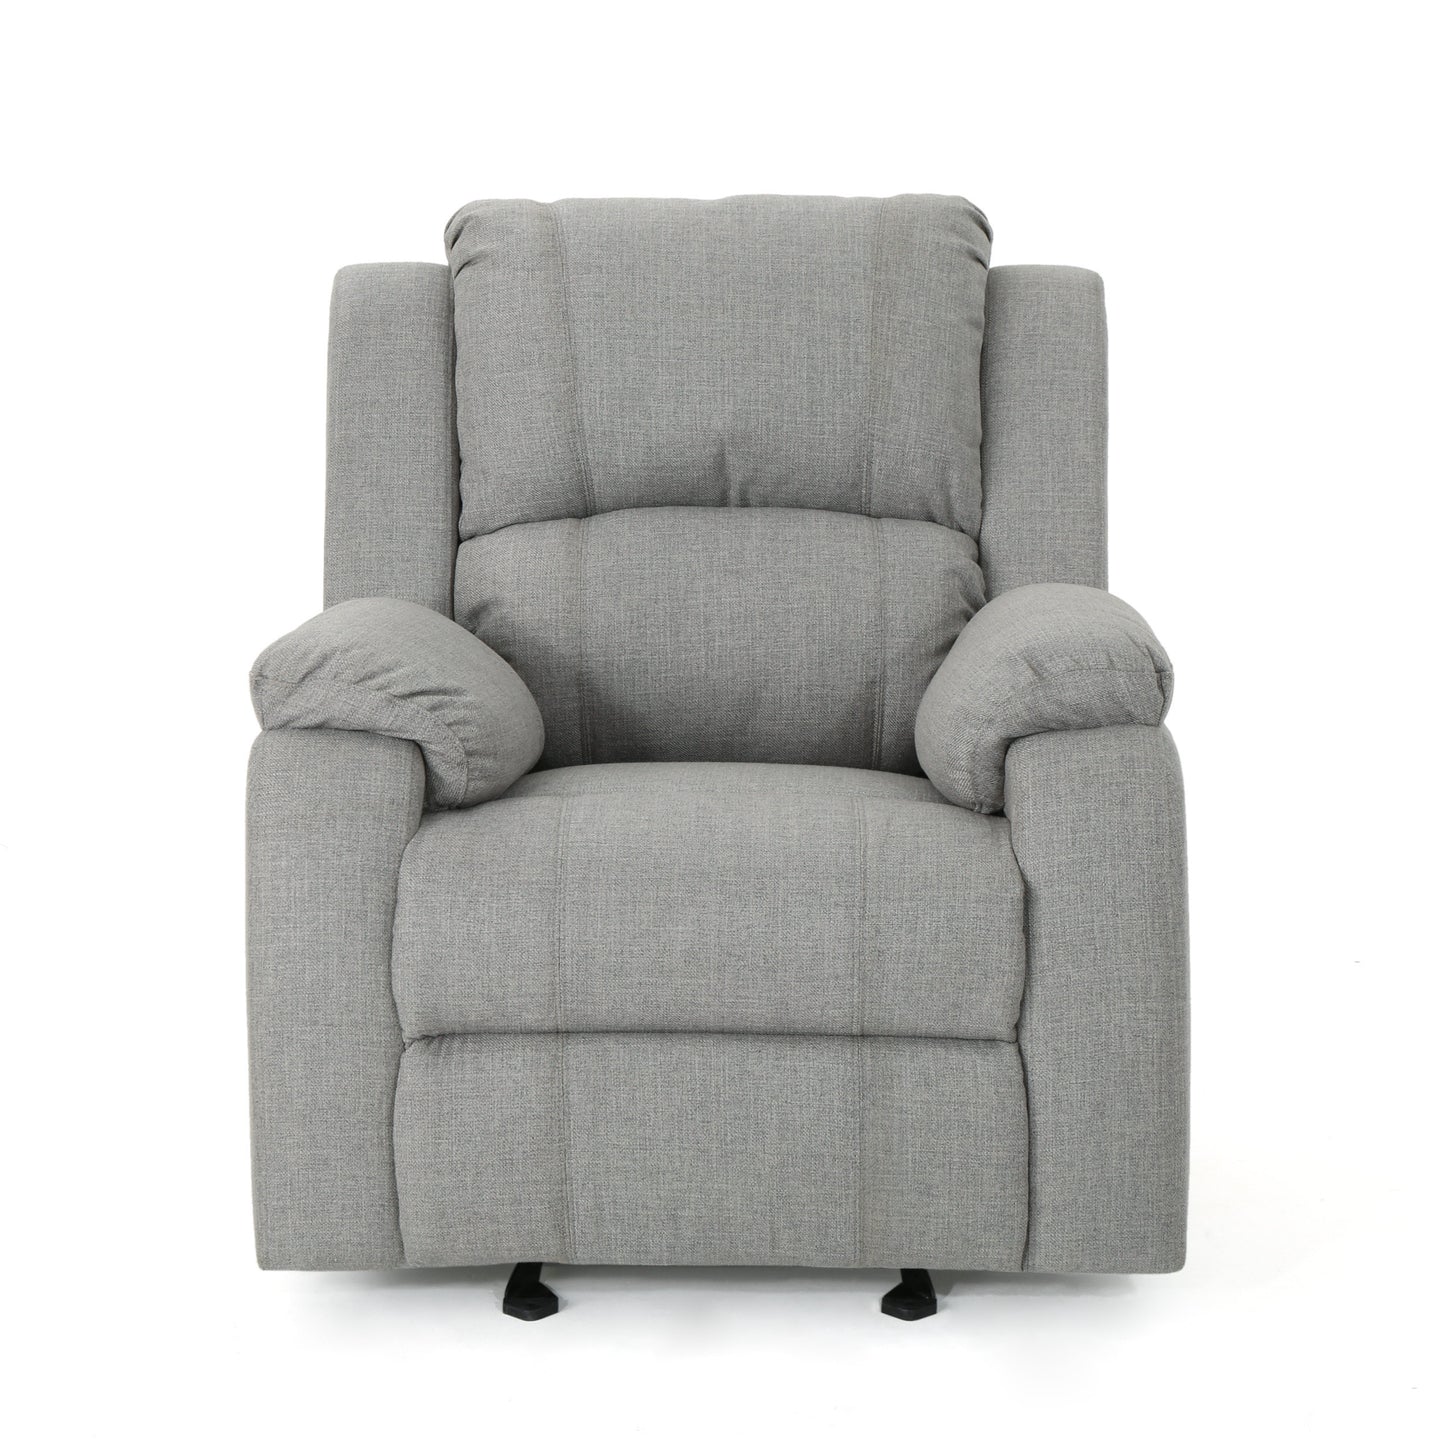 Scarlett Contemporary Pillow Top Fabric Upholstered Gliding Recliner Chair